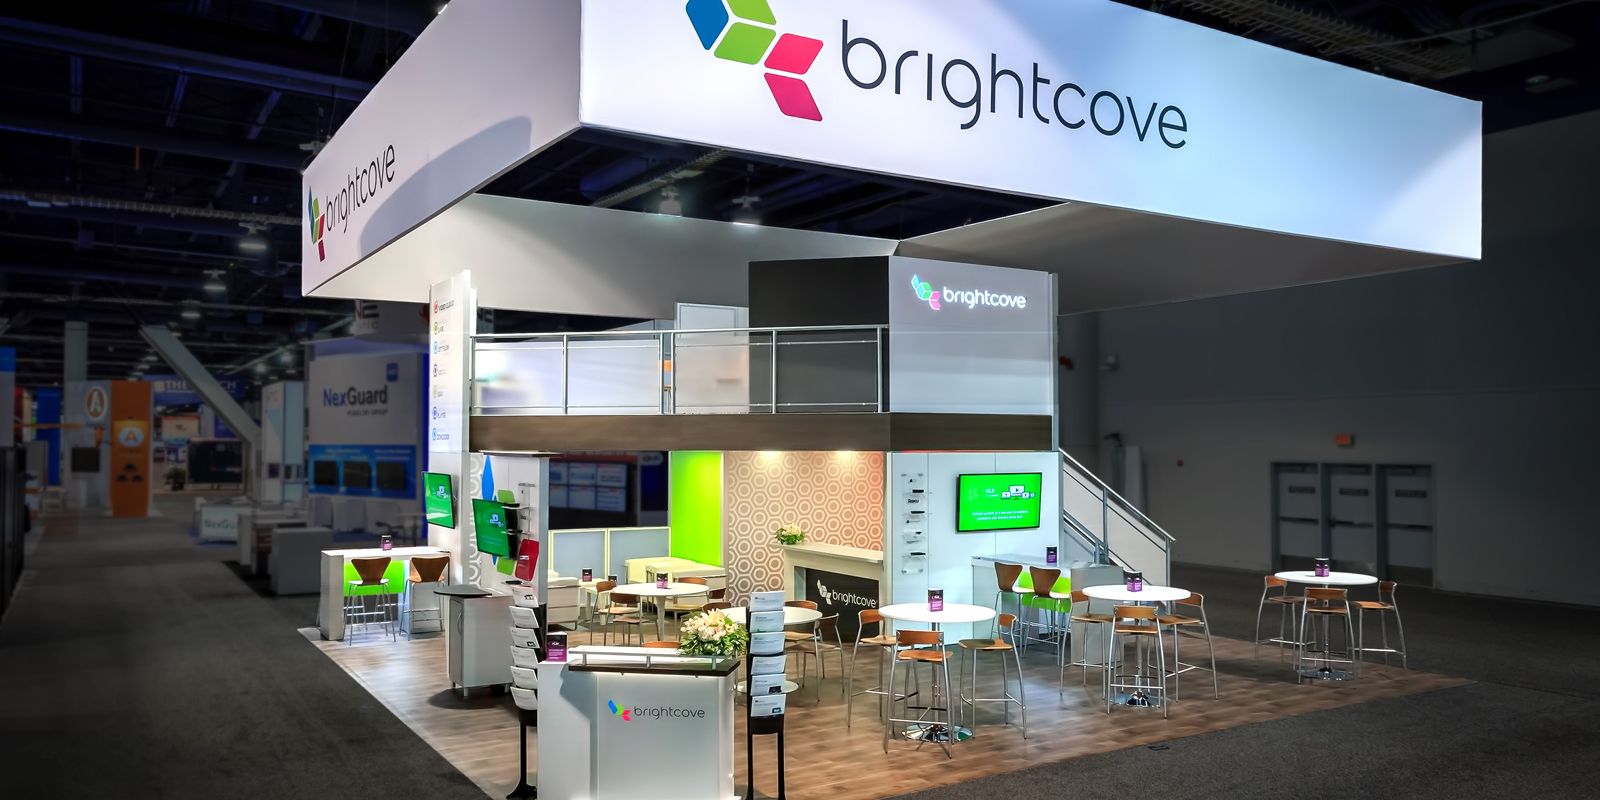 Hill & Partners Rental Branded Environment Trade Show Exhibit for Brightcove